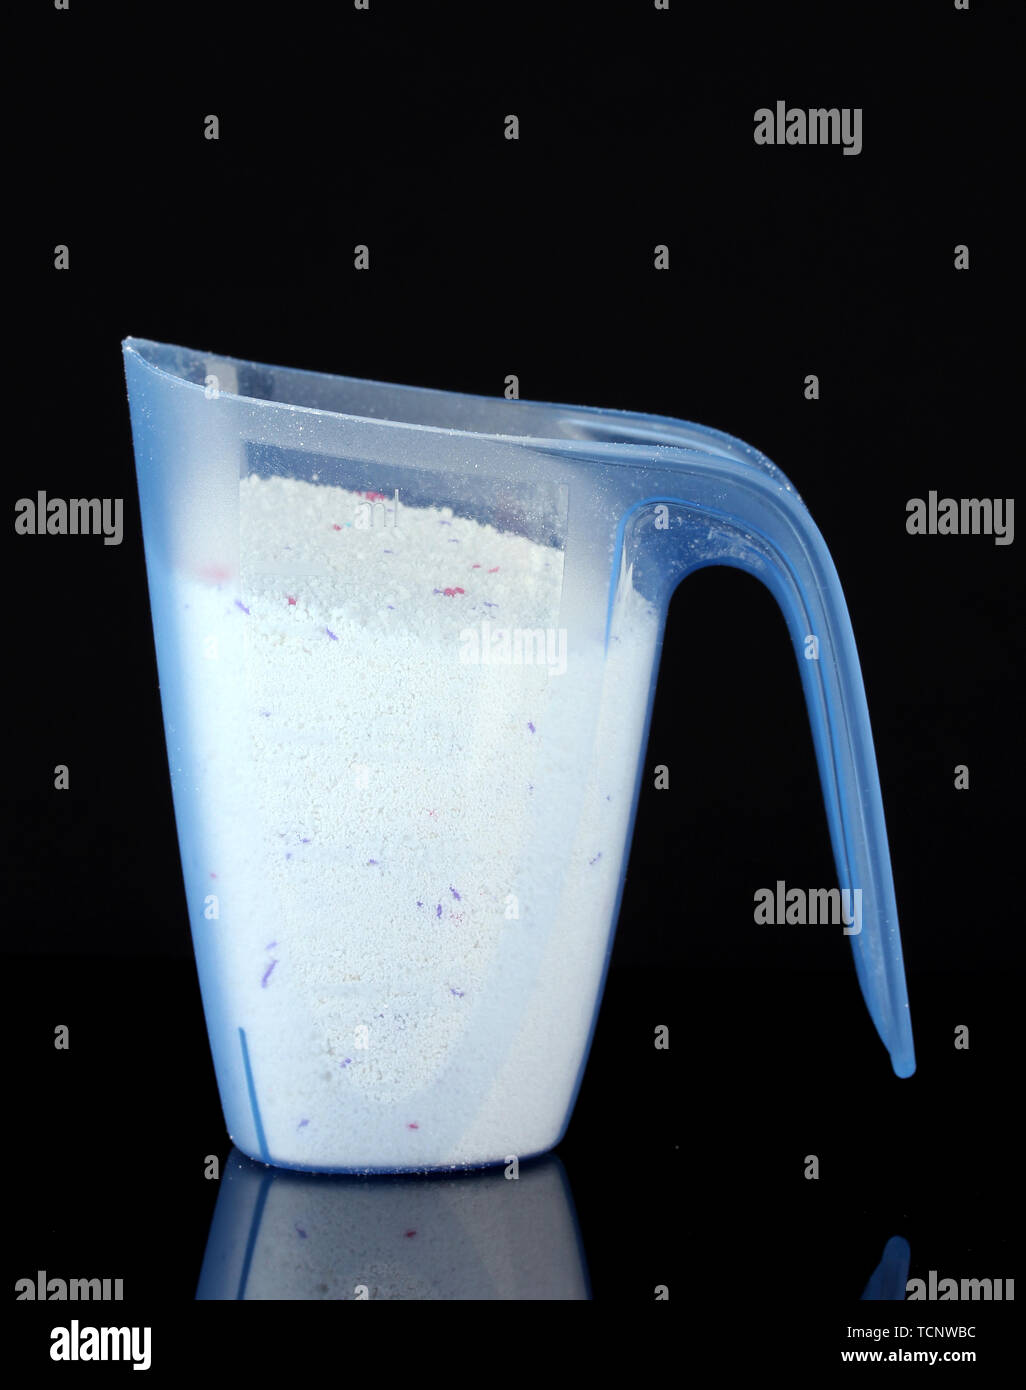 https://c8.alamy.com/comp/TCNWBC/washing-powder-in-a-measuring-cup-isolated-on-black-TCNWBC.jpg